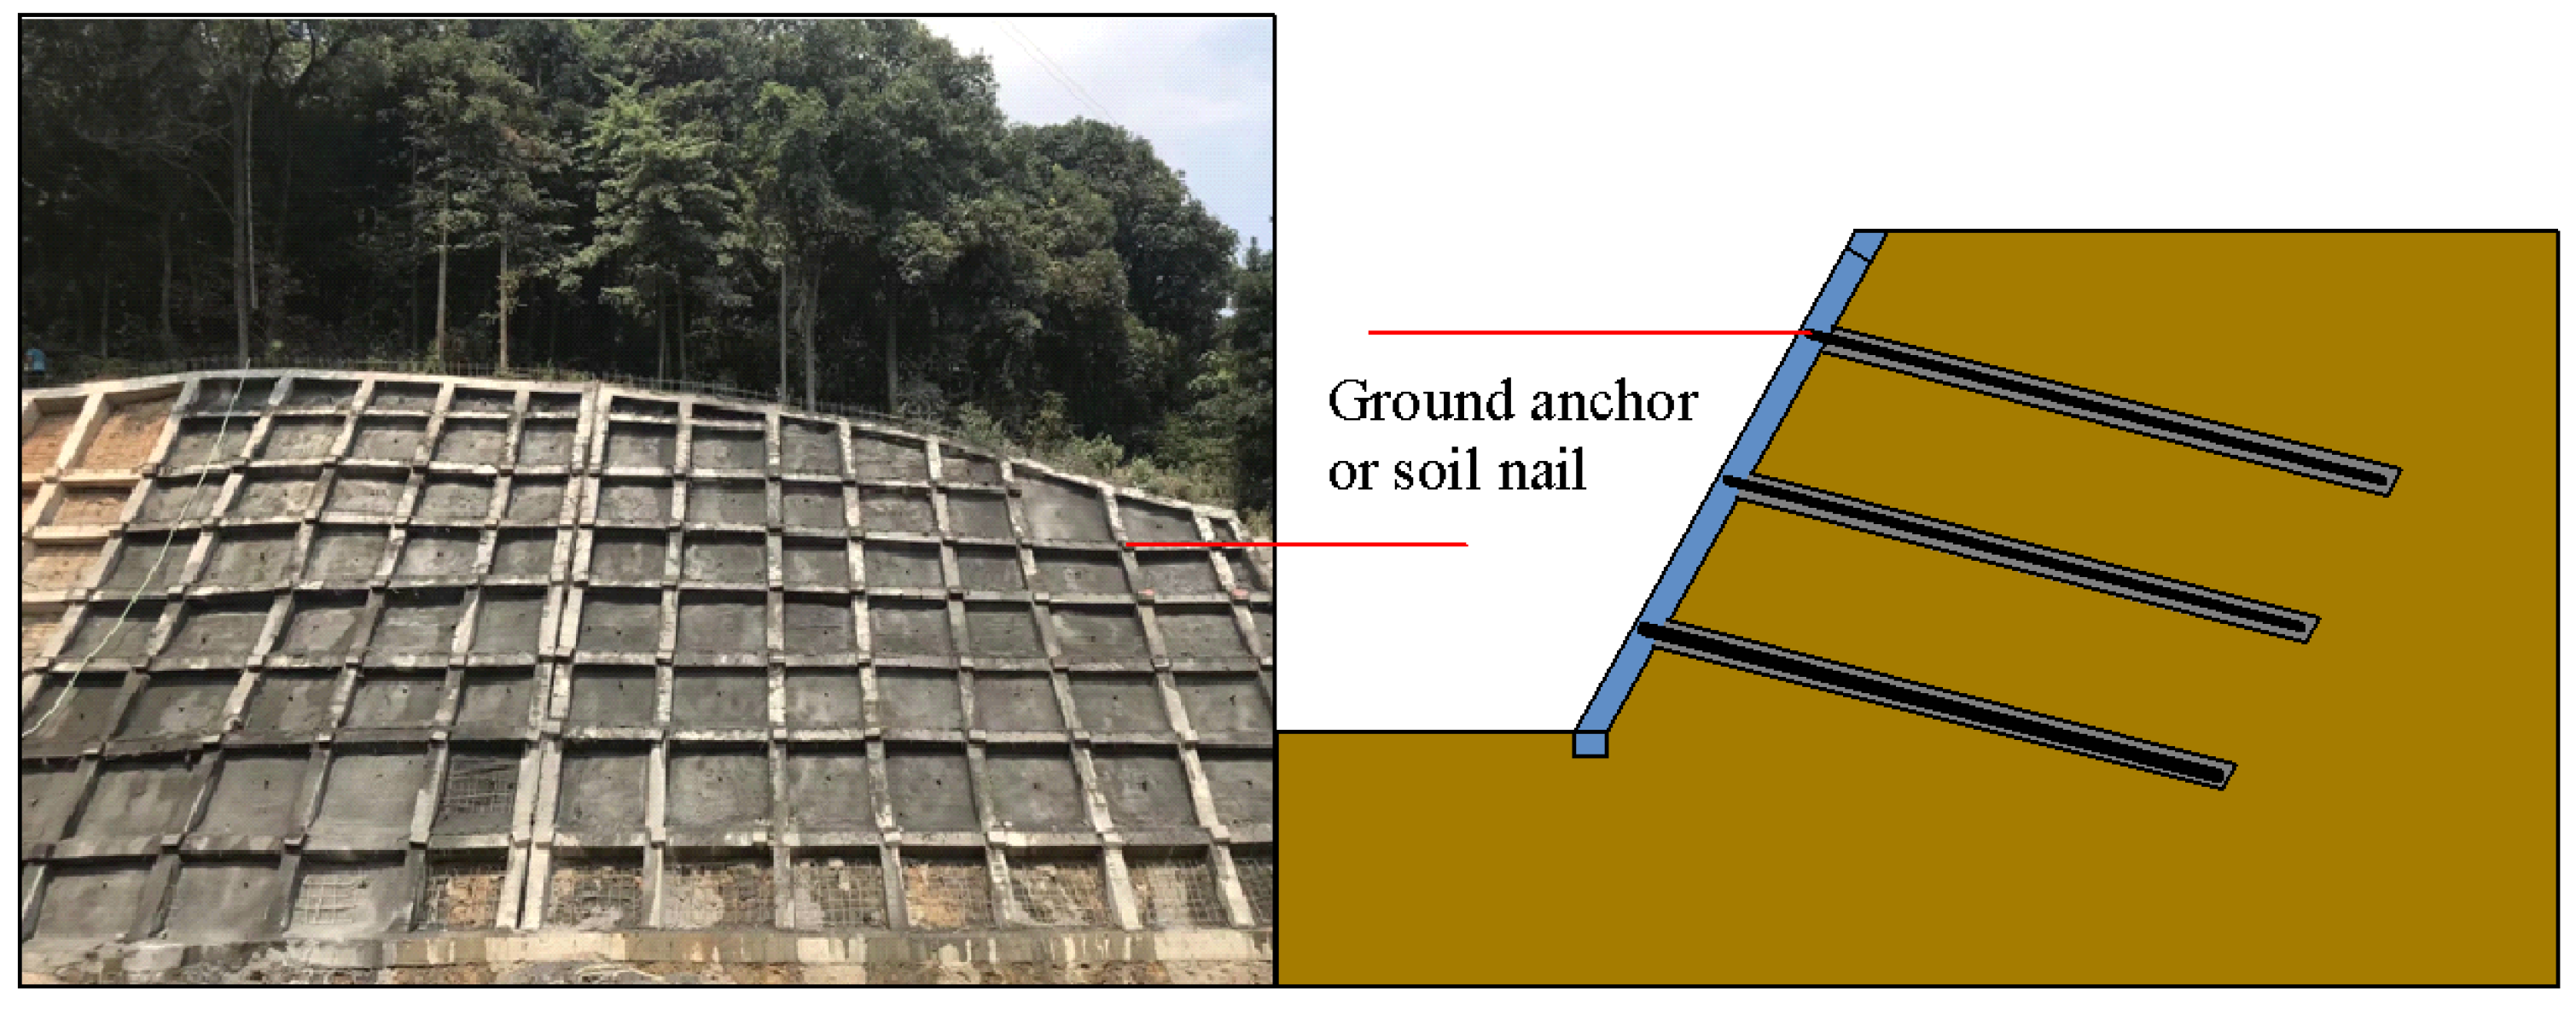 Geotechnics | Free Full-Text | Parametric Assessment of Soil Nailing on the  Stability of Slopes Using Numerical Approach